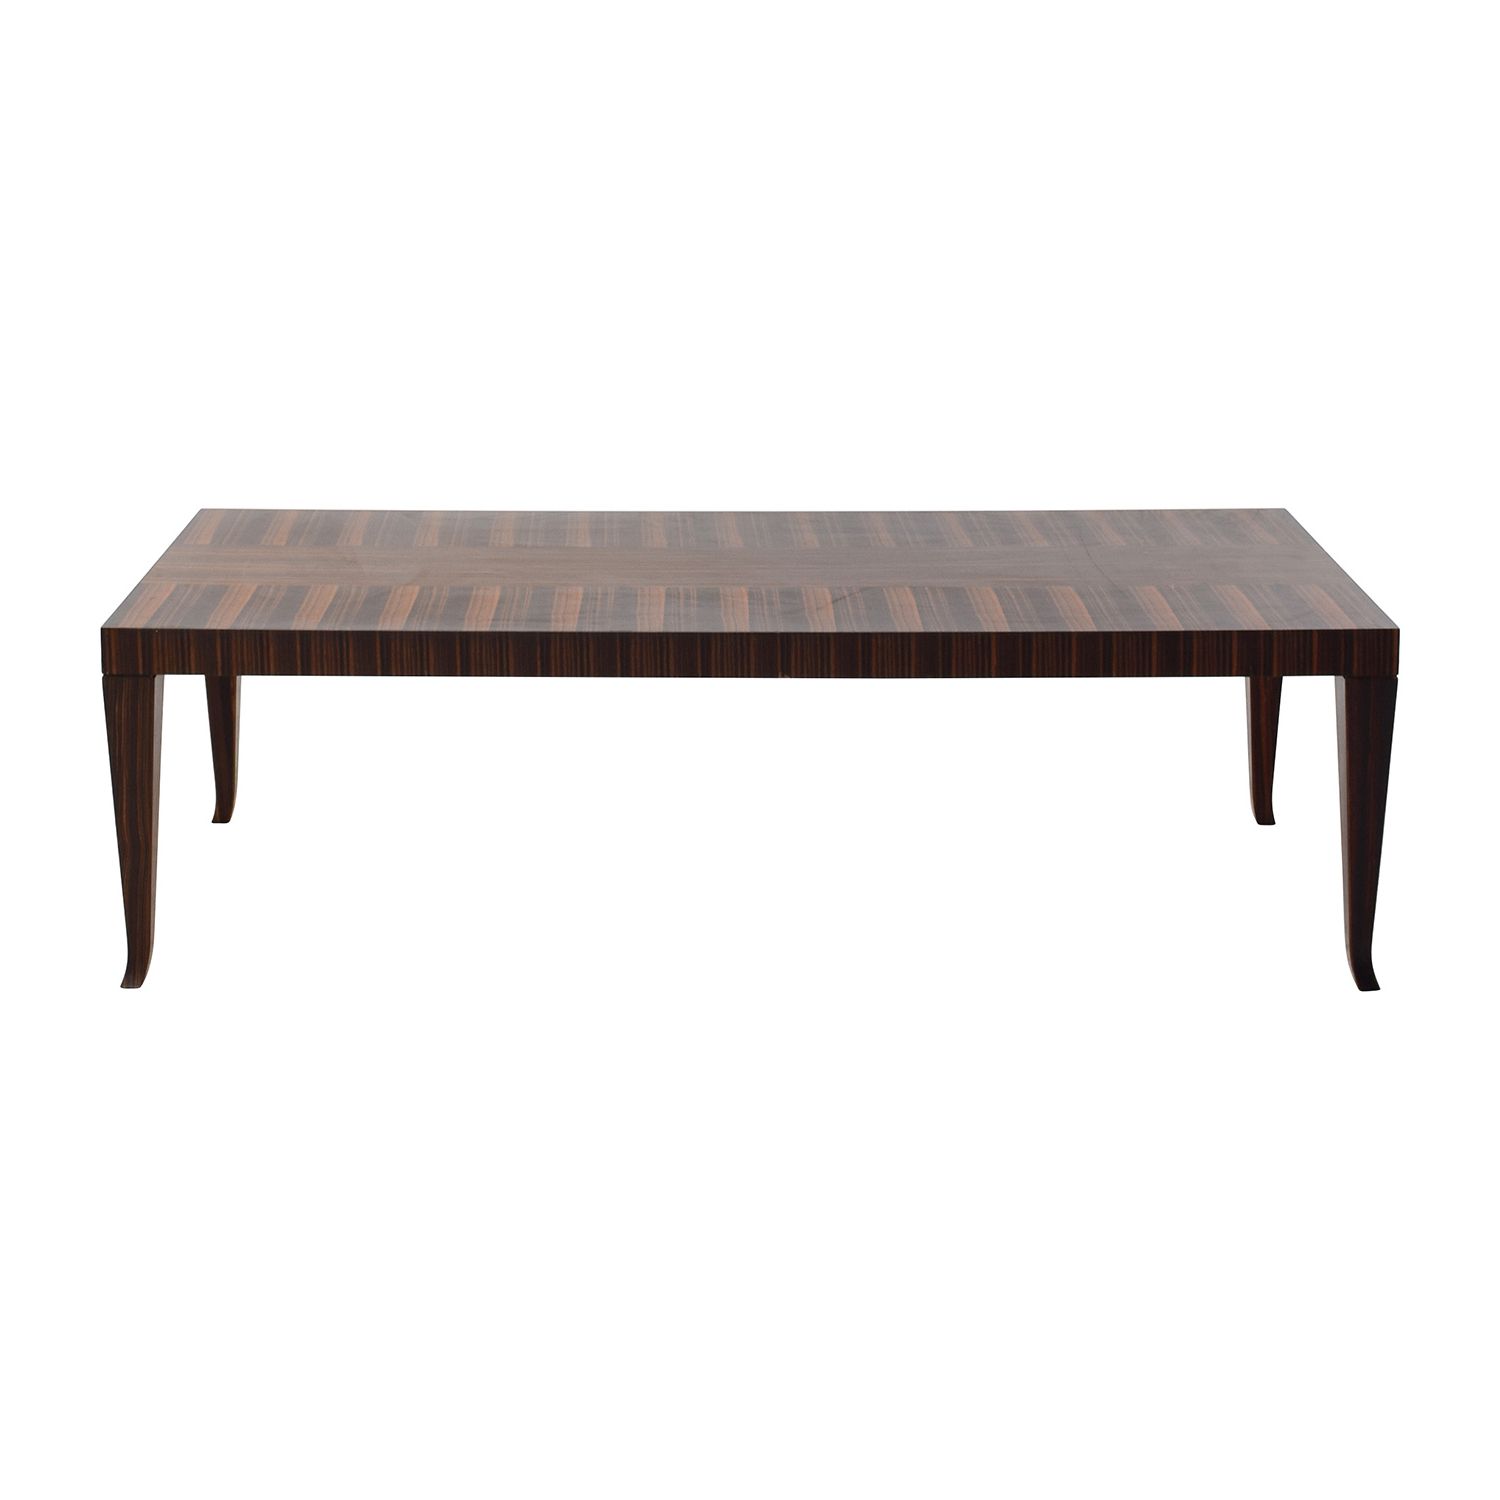 [%56% Off – Ashley Furniture Ashley Furniture Faux Marble Coffee Table Within Most Popular Combs Cocktail Tables|combs Cocktail Tables In Most Popular 56% Off – Ashley Furniture Ashley Furniture Faux Marble Coffee Table|well Known Combs Cocktail Tables Regarding 56% Off – Ashley Furniture Ashley Furniture Faux Marble Coffee Table|well Known 56% Off – Ashley Furniture Ashley Furniture Faux Marble Coffee Table In Combs Cocktail Tables%] (View 11 of 20)